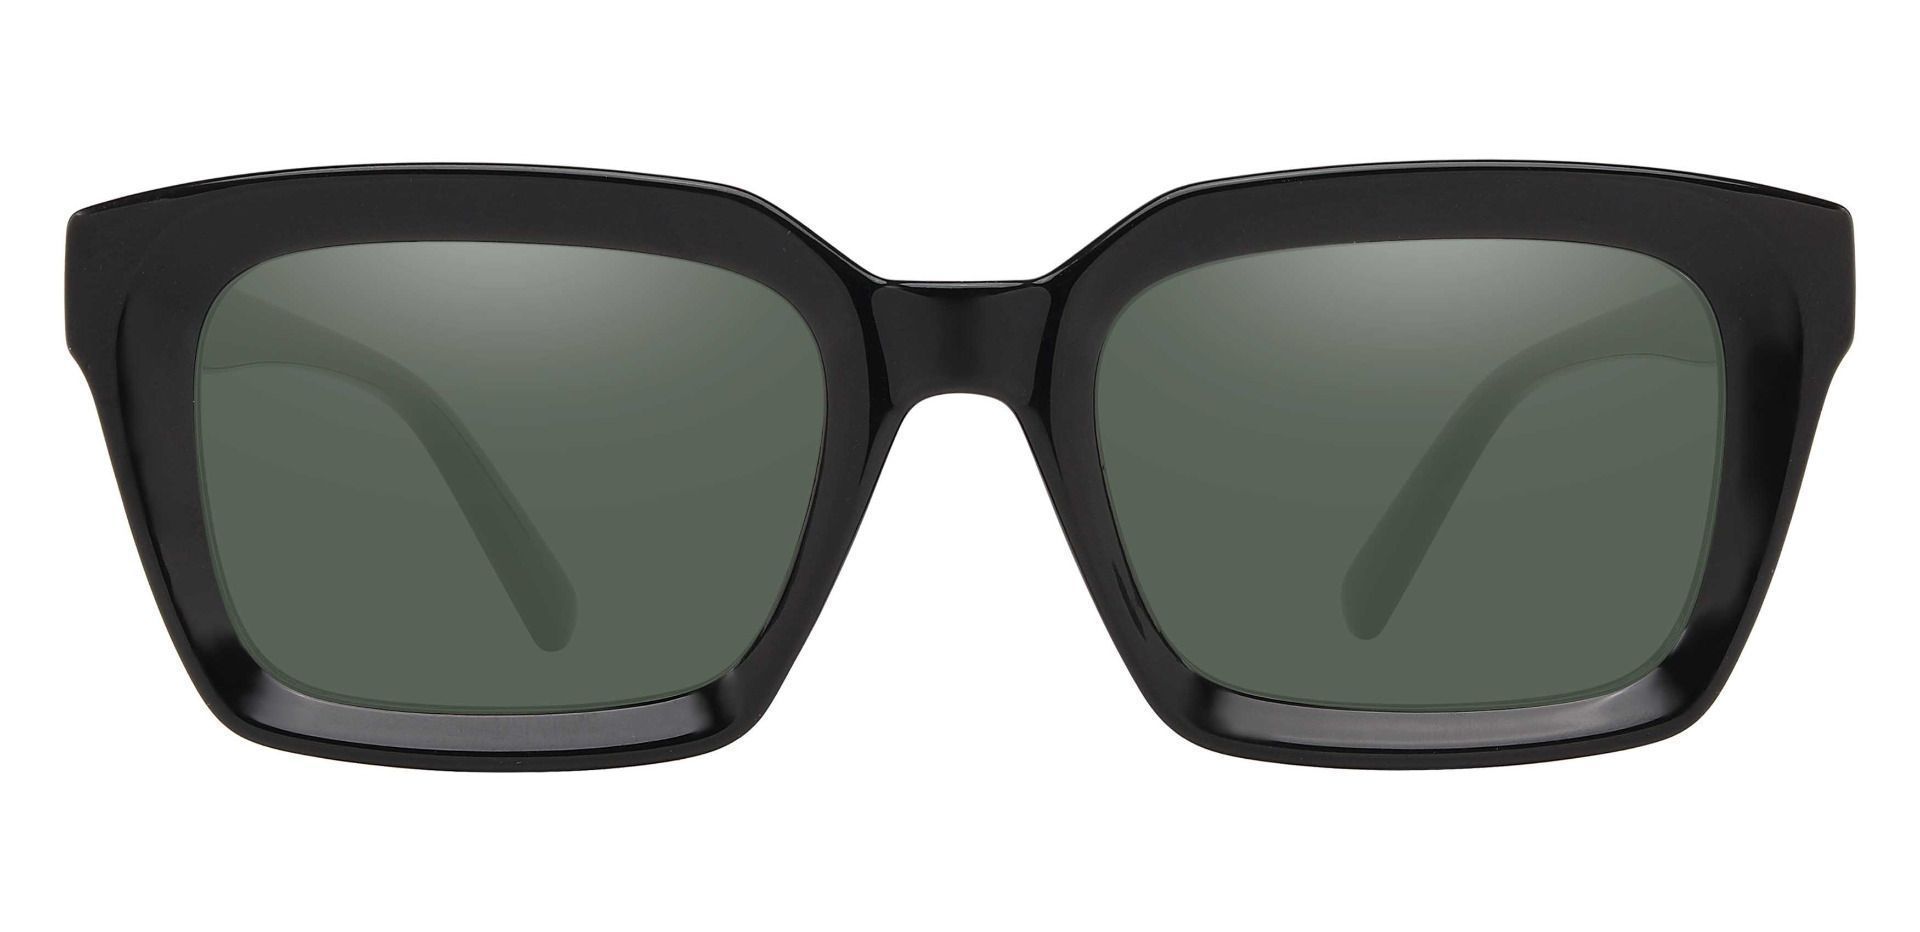 Unity Rectangle Non-Rx Sunglasses - Black Frame With Green Lenses